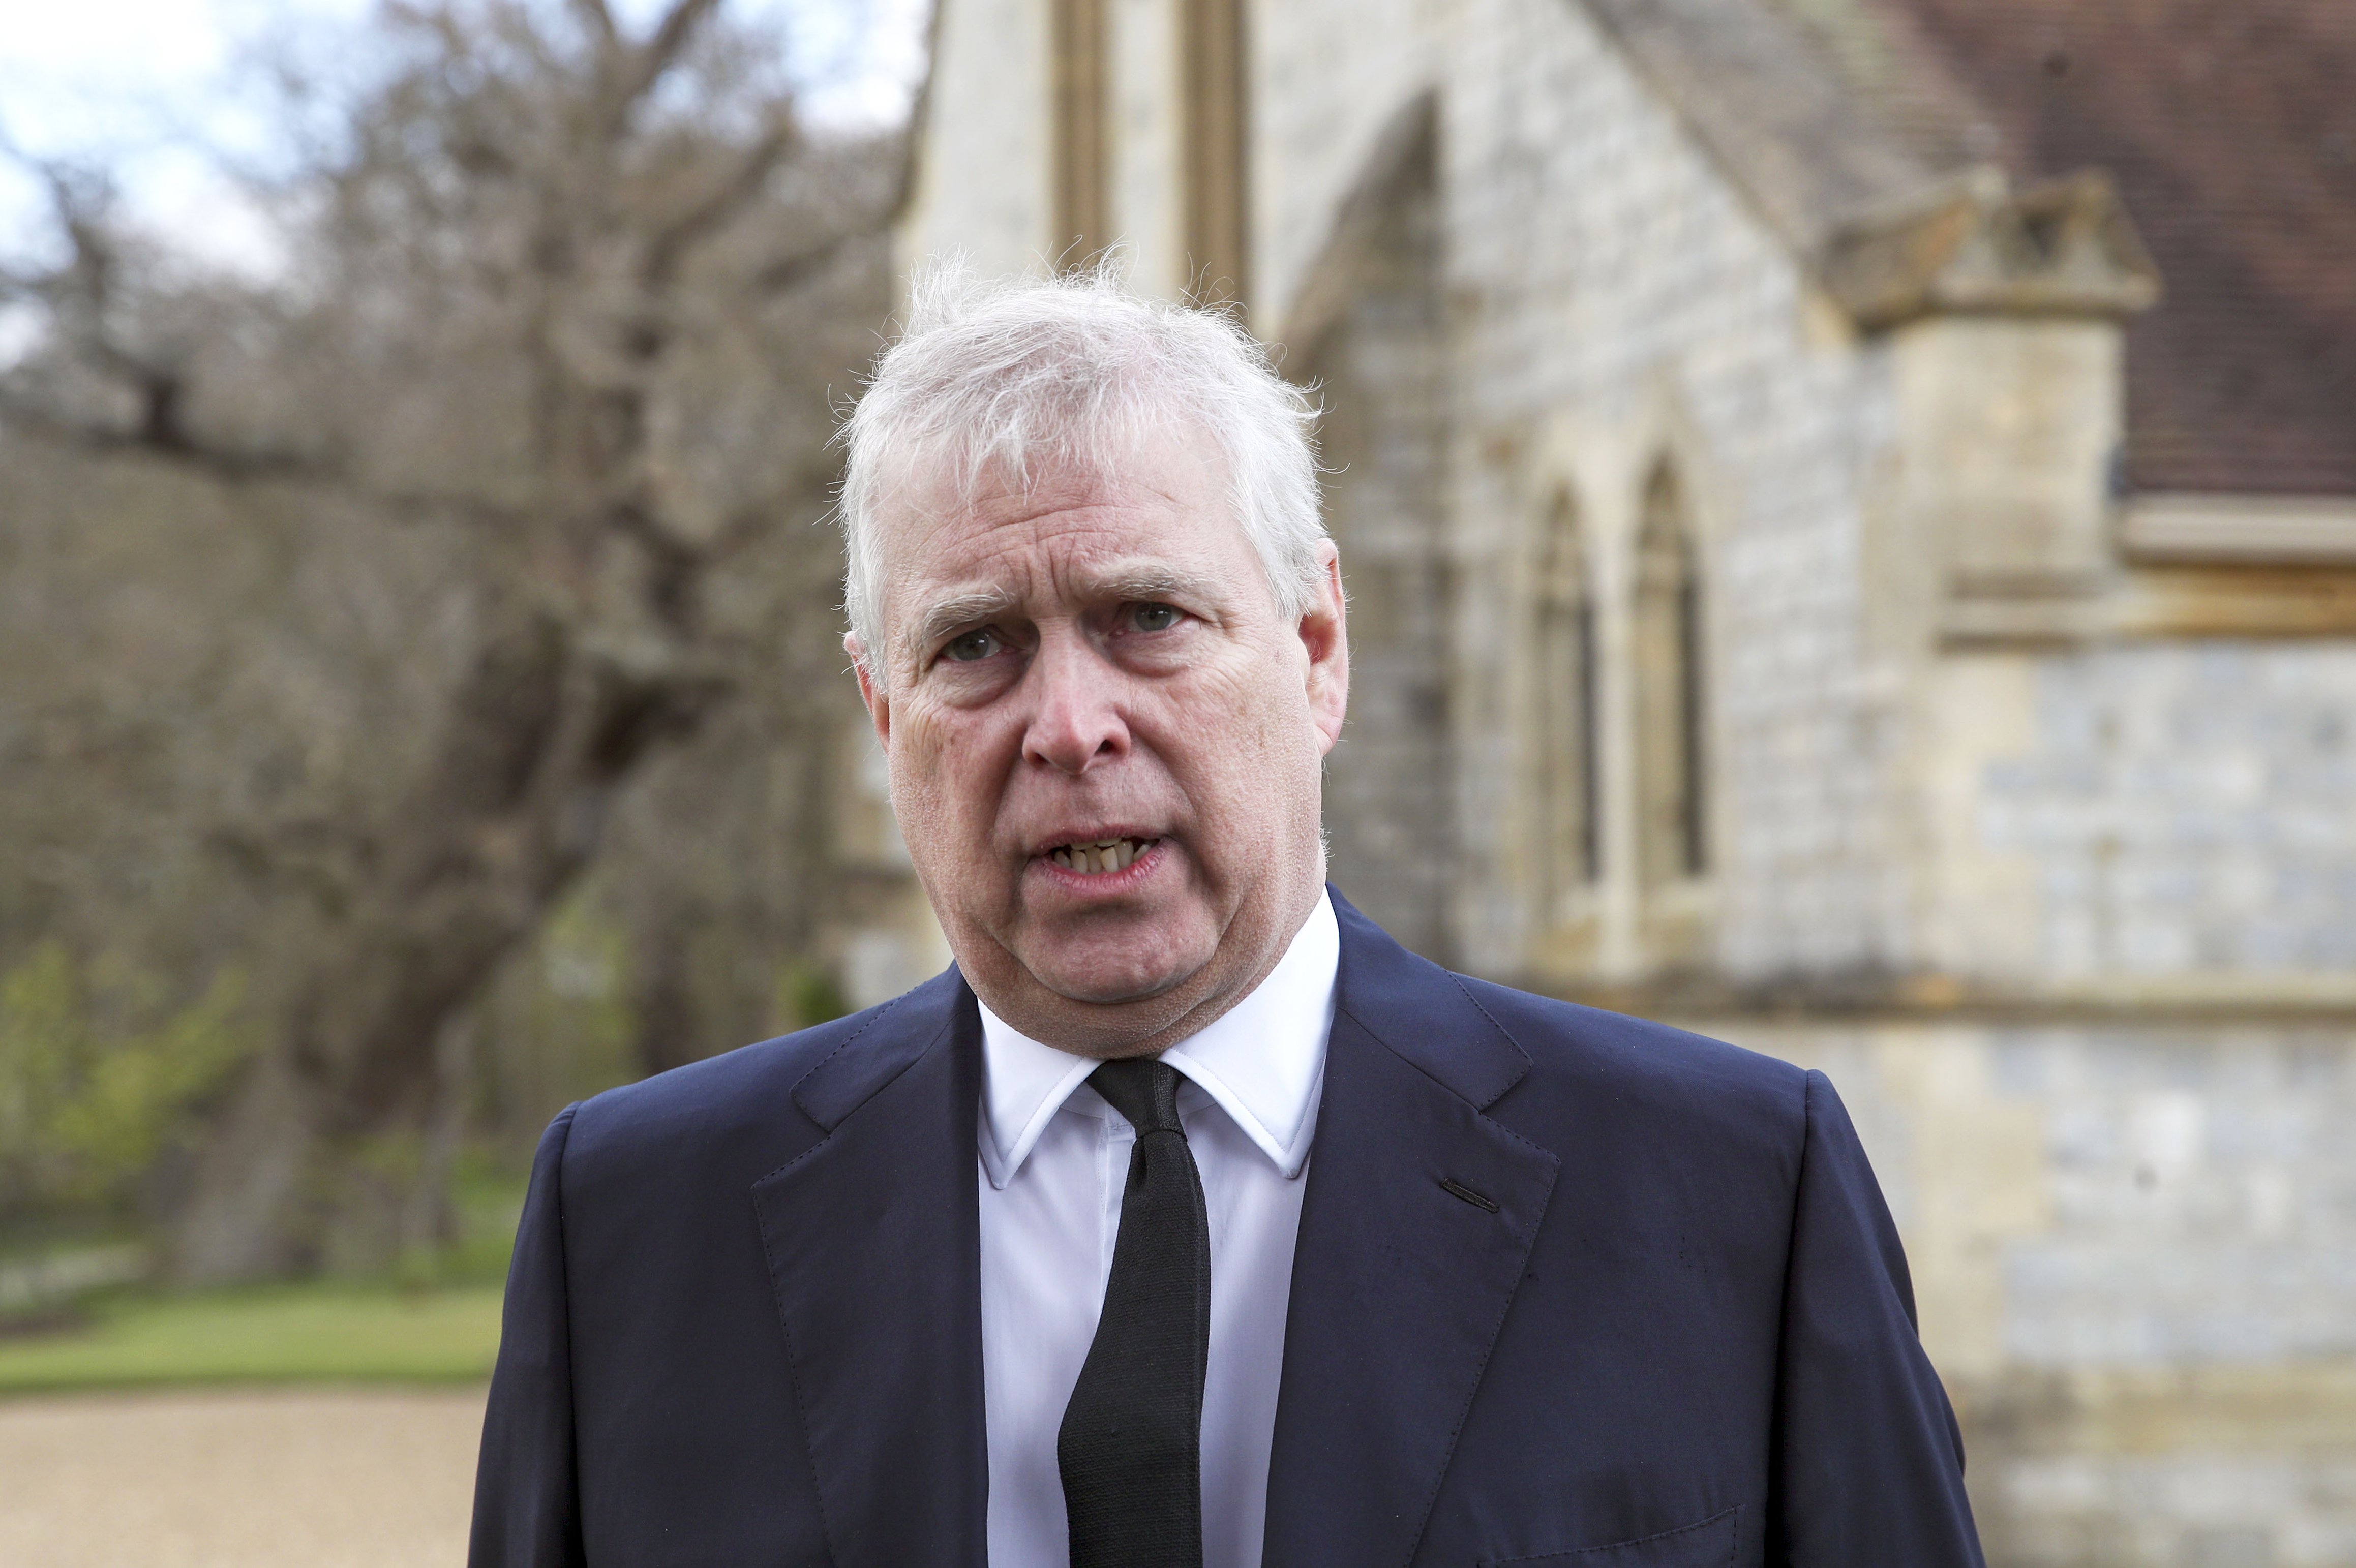  Prince Andrew, Duke of York, attends the Sunday Service at the Royal Chapel of All Saints, Windsor, following the announcement on Friday April 9th of the death of Prince Philip, Duke of Edinburgh, at the age of 99, on April 11, 2021 in Windsor, England. | Source: Getty Images